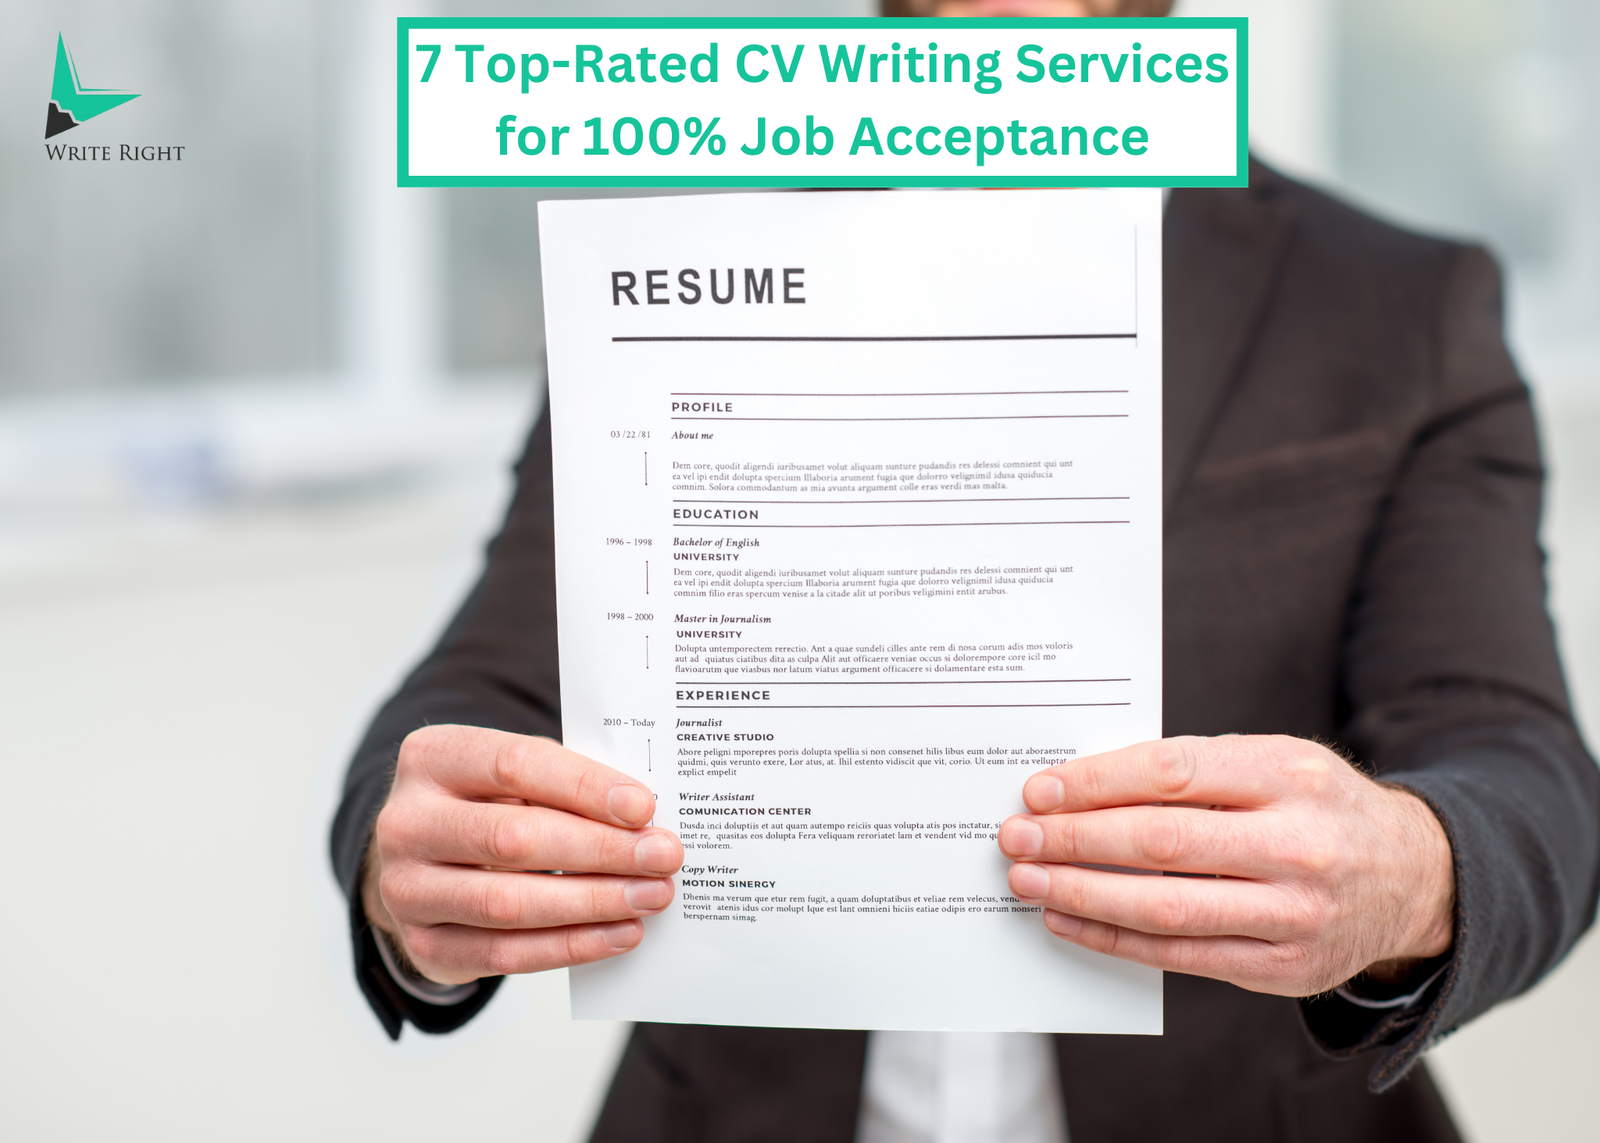 7 Top-Rated CV Writing Services for 100% Job Acceptance